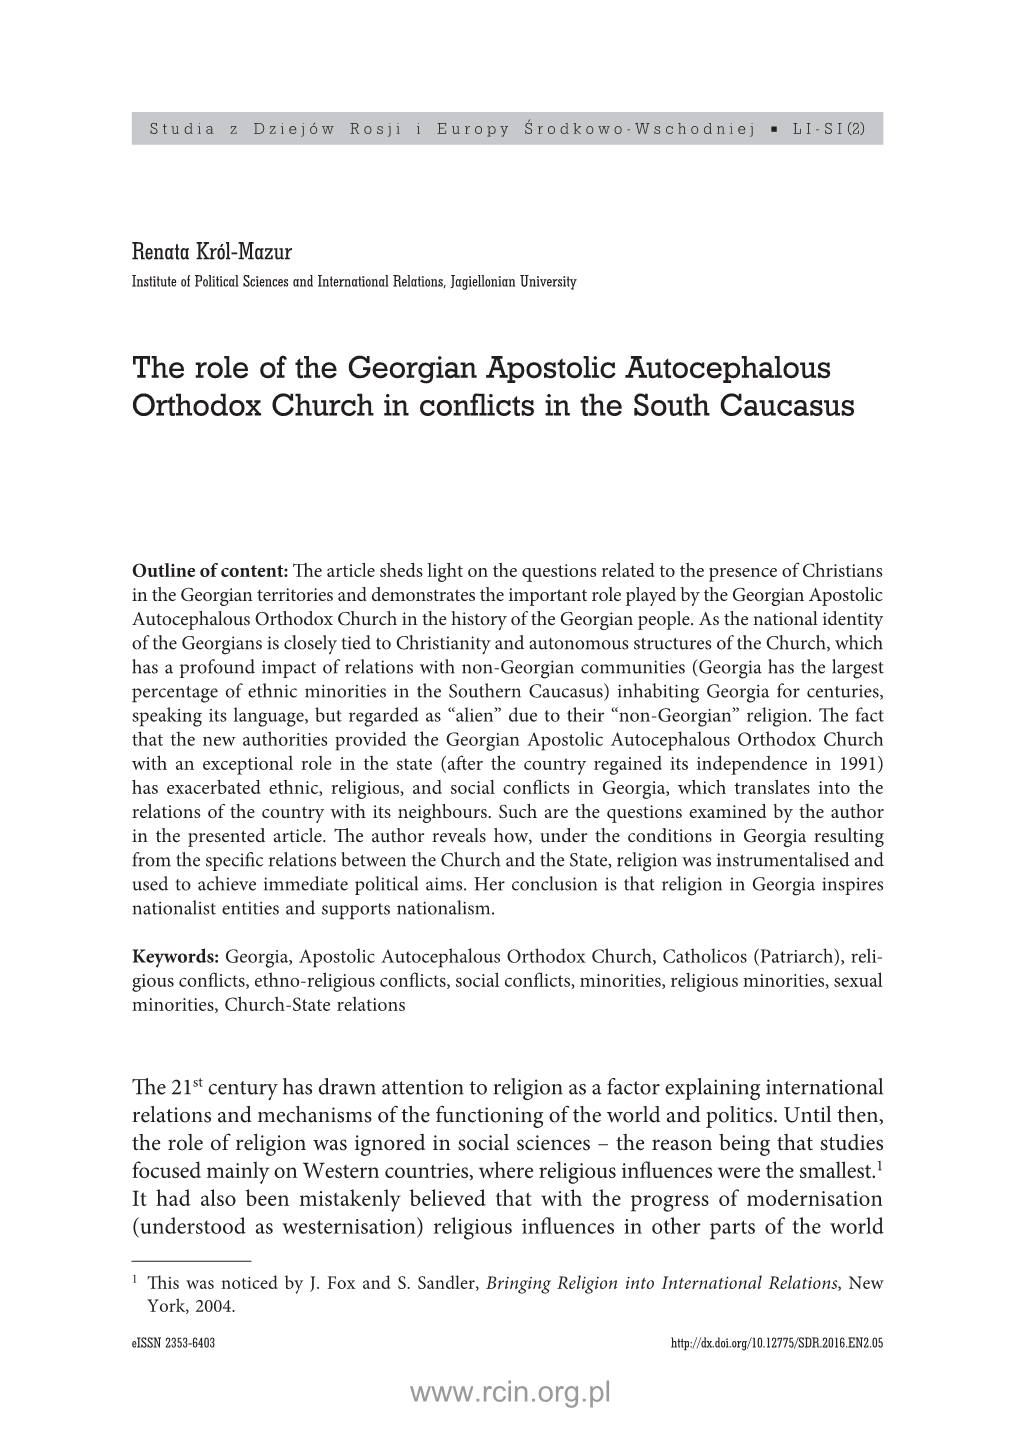 The Role of the Georgian Apostolic Autocephalous Orthodox Church in Conflicts in the South Caucasus